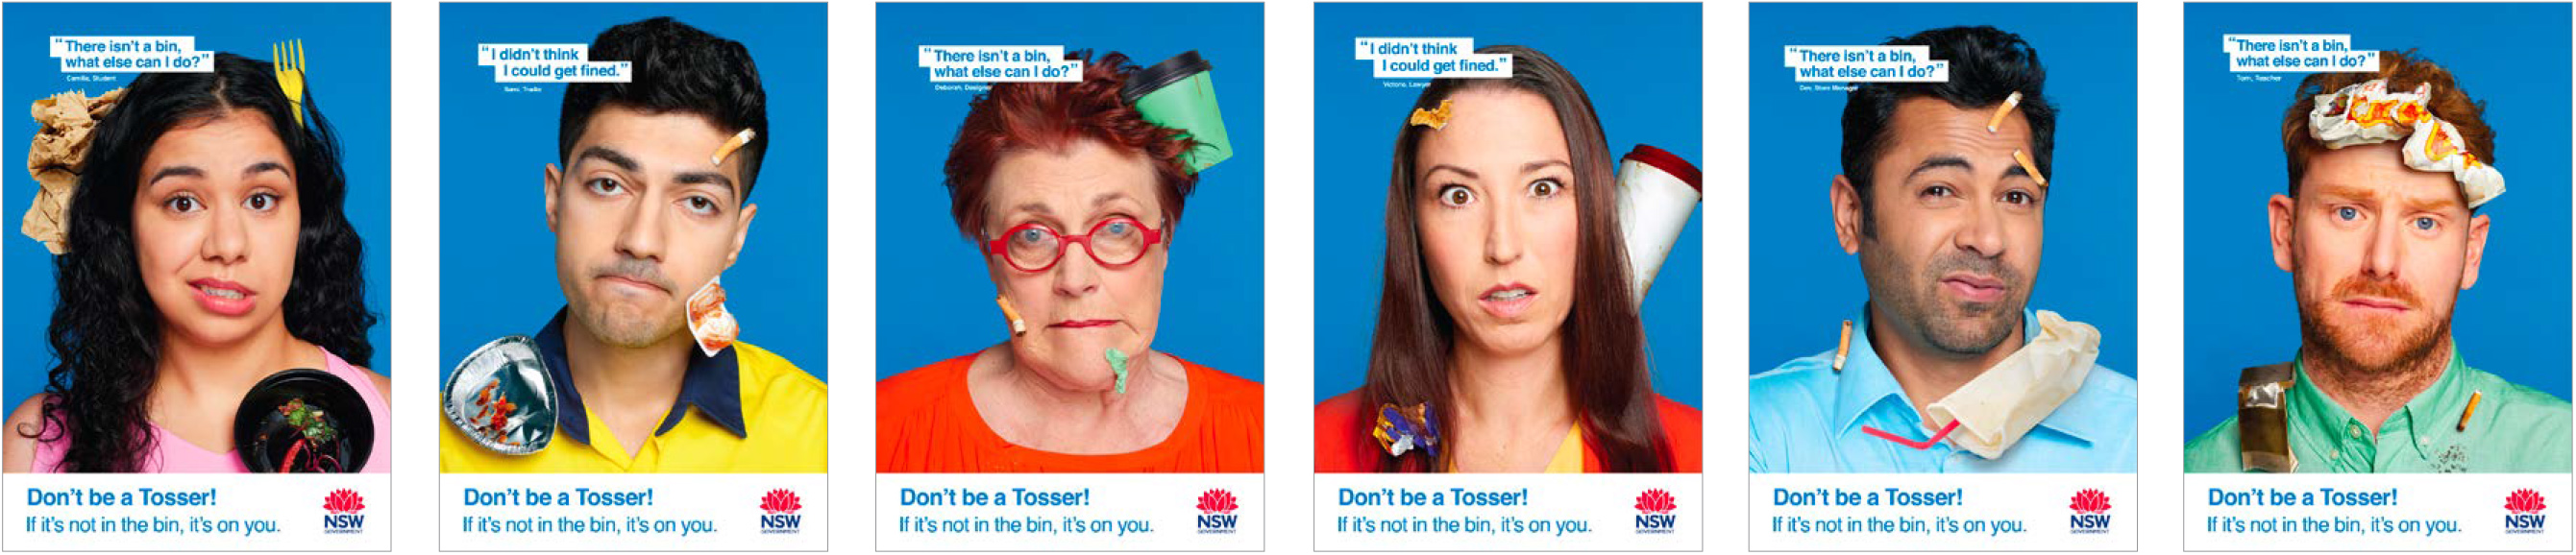 Don't be a Tosser campaign characters with litter excuses.